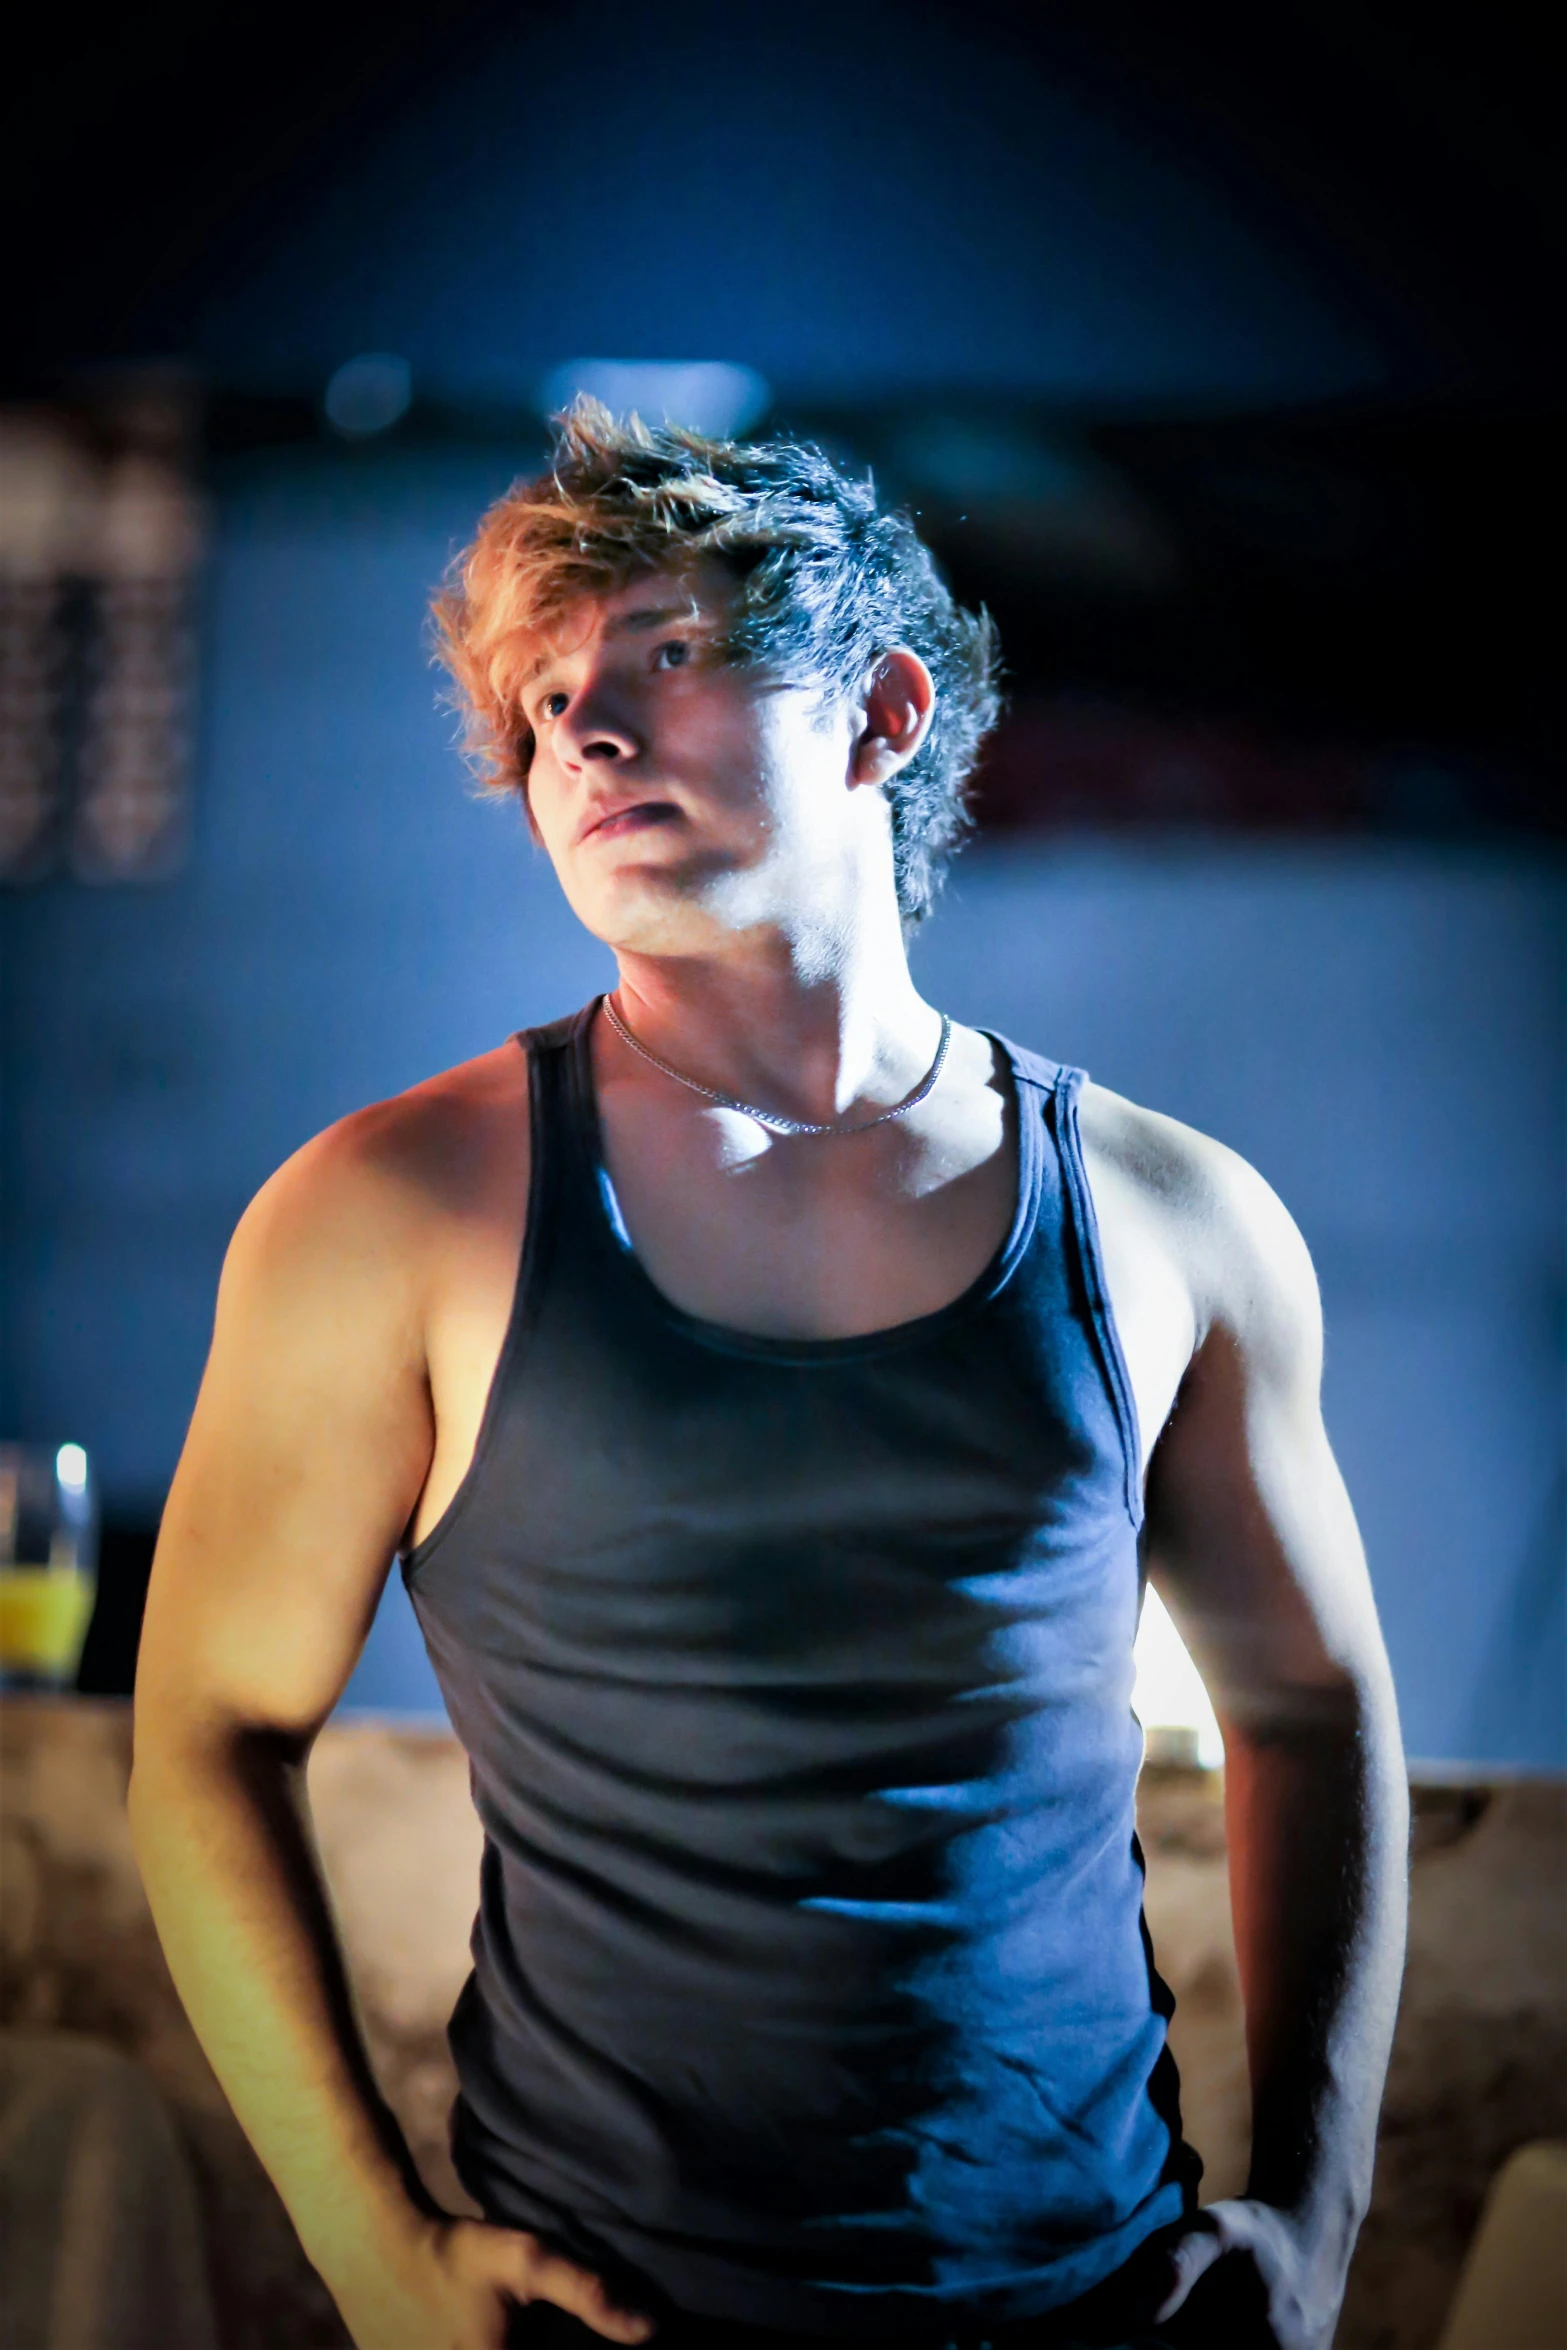 a man in a tank top sitting on a couch, inspired by John Luke, dramatic intense lighting, performing on stage, profile image, cool tousled hair